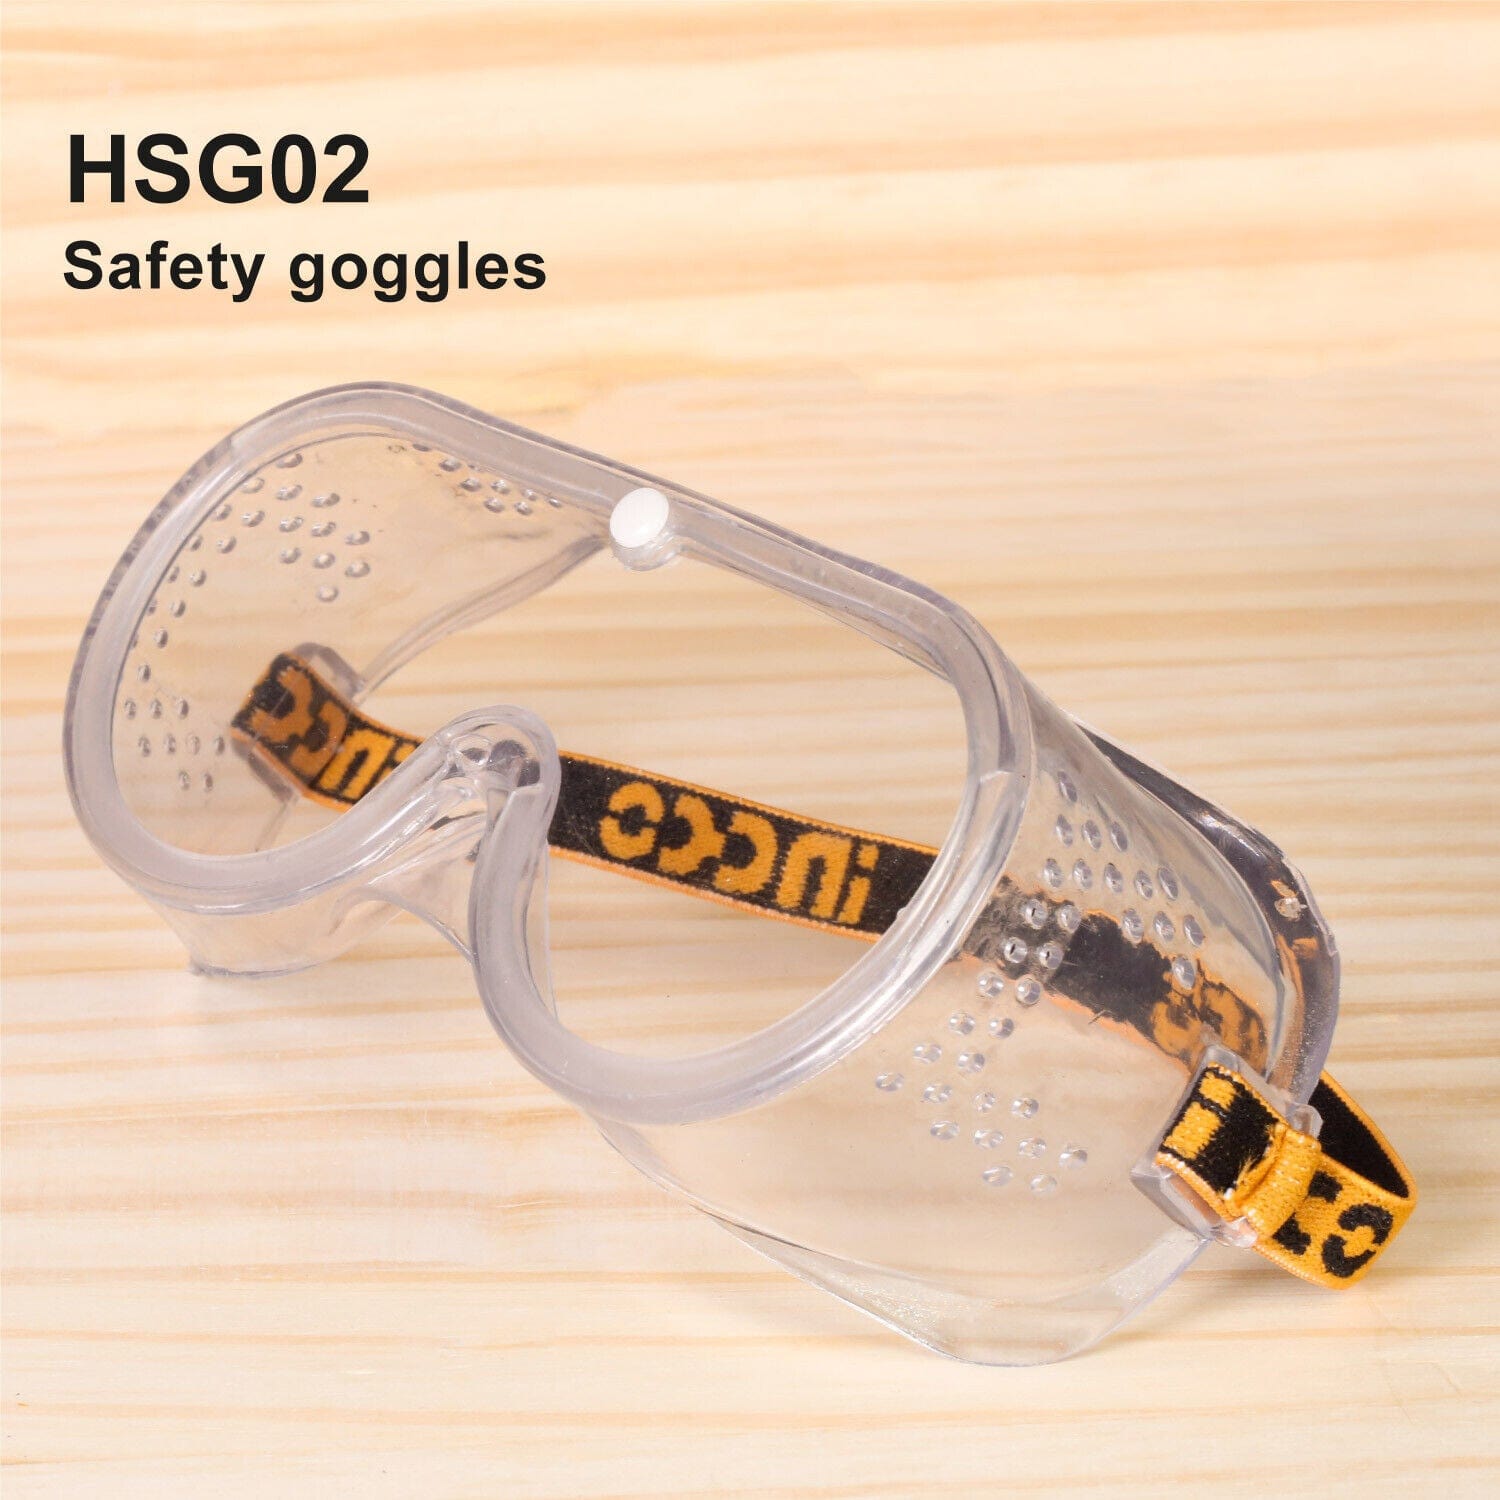 Ingco Safety Goggles - HSG02 | Buy Online in Accra, Ghana - Supply Master Eye Protection & Safety Glasses Buy Tools hardware Building materials